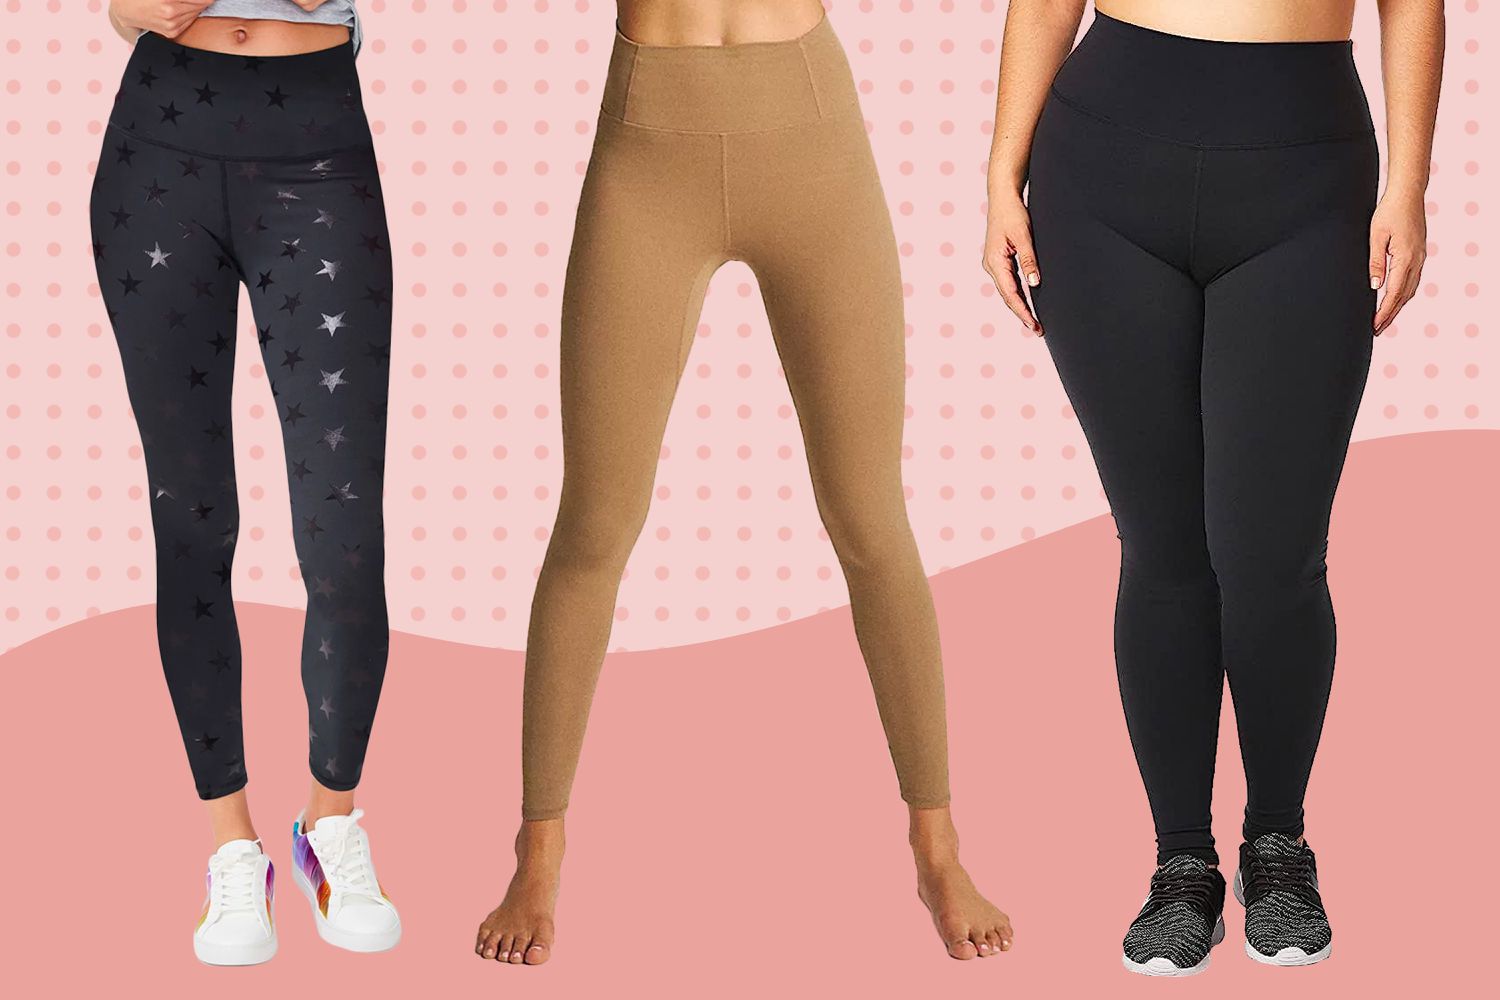 A collage of leggings from legging brands we recommend on a pink background